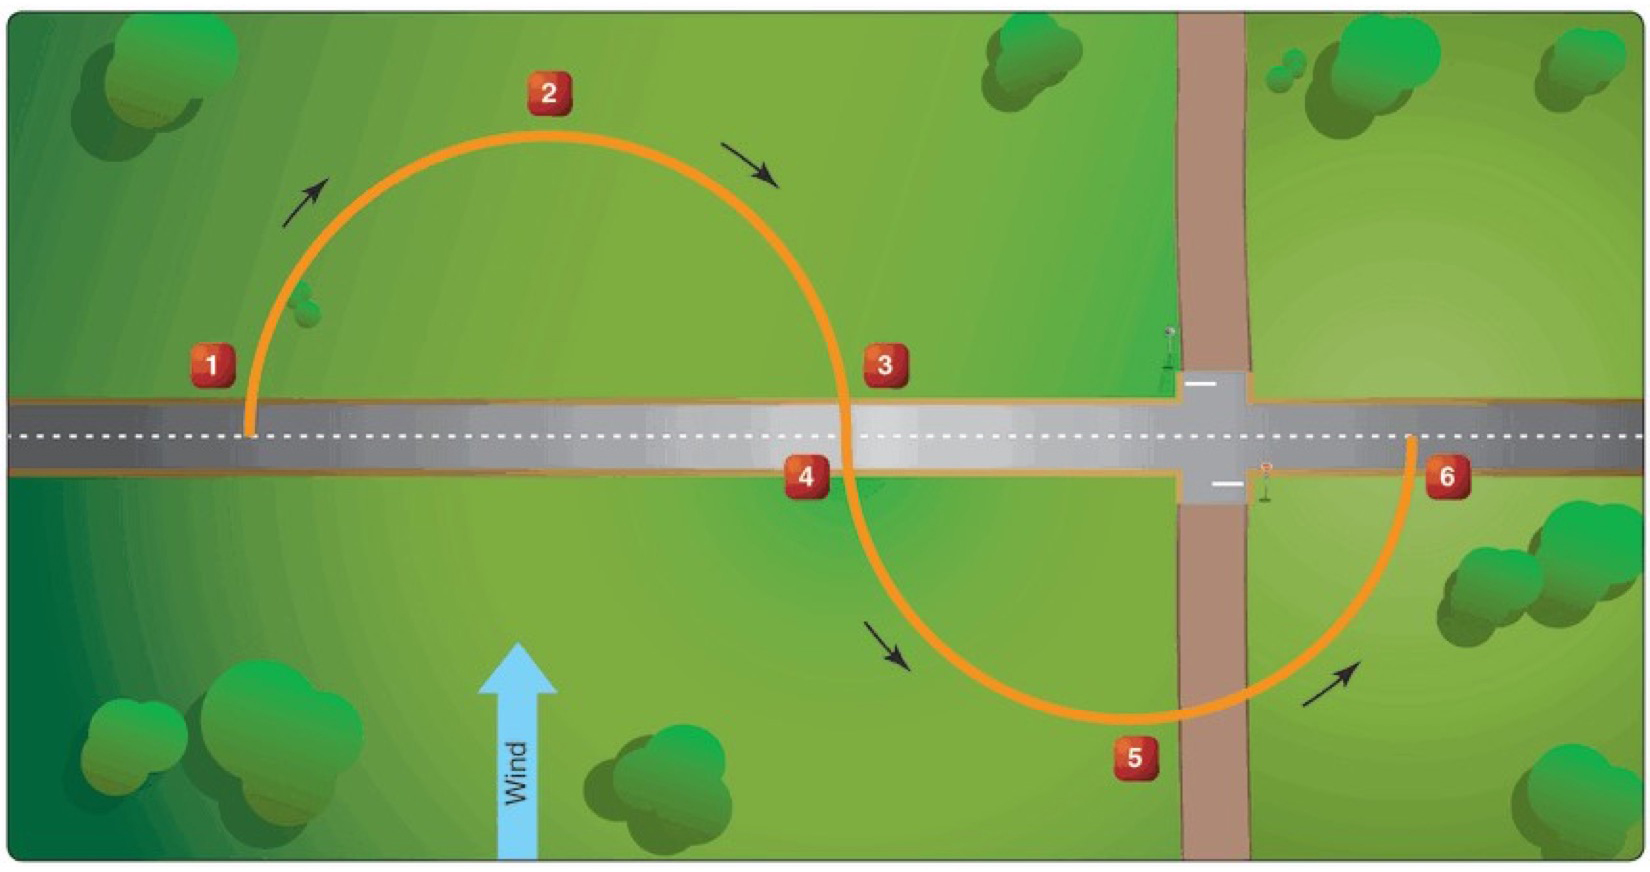 (Refer to Figure 66.) While practicing S-turns, a consistently smaller half-circle is made on one side of the road than on the other, and this turn is not completed before crossing the road or reference line. This would most likely occur in turn